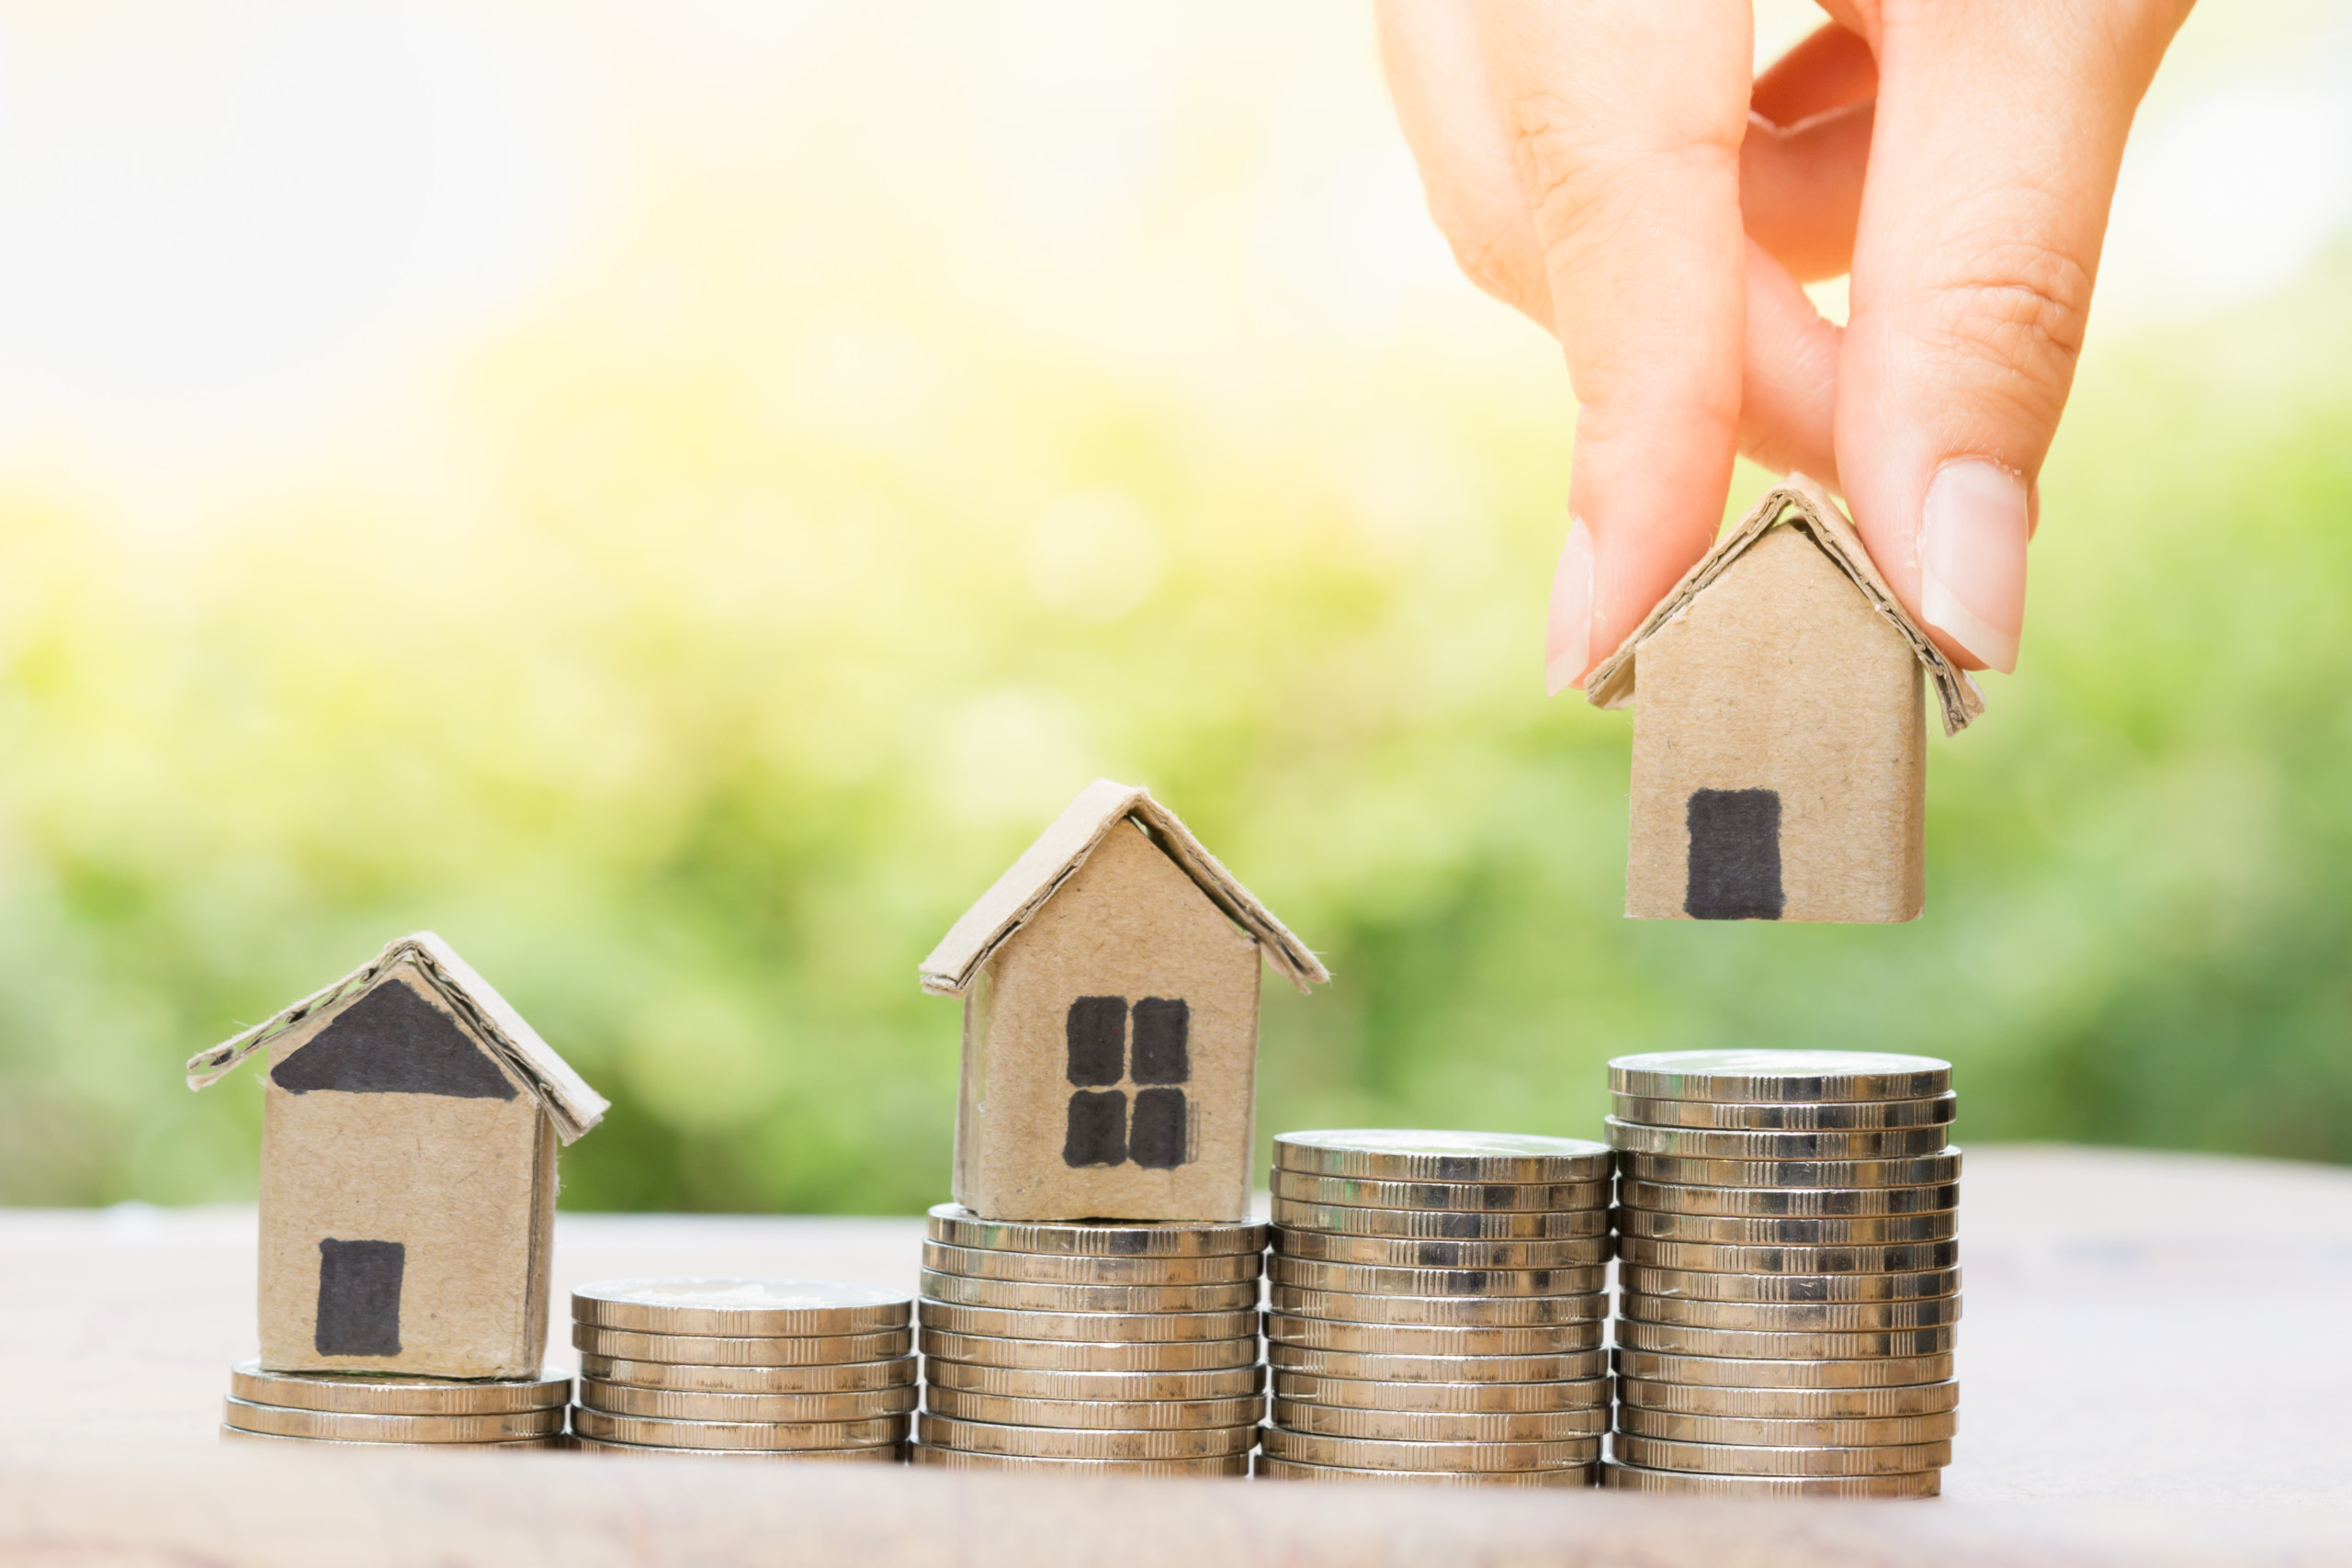 What makes a good investment property? Look out for these features